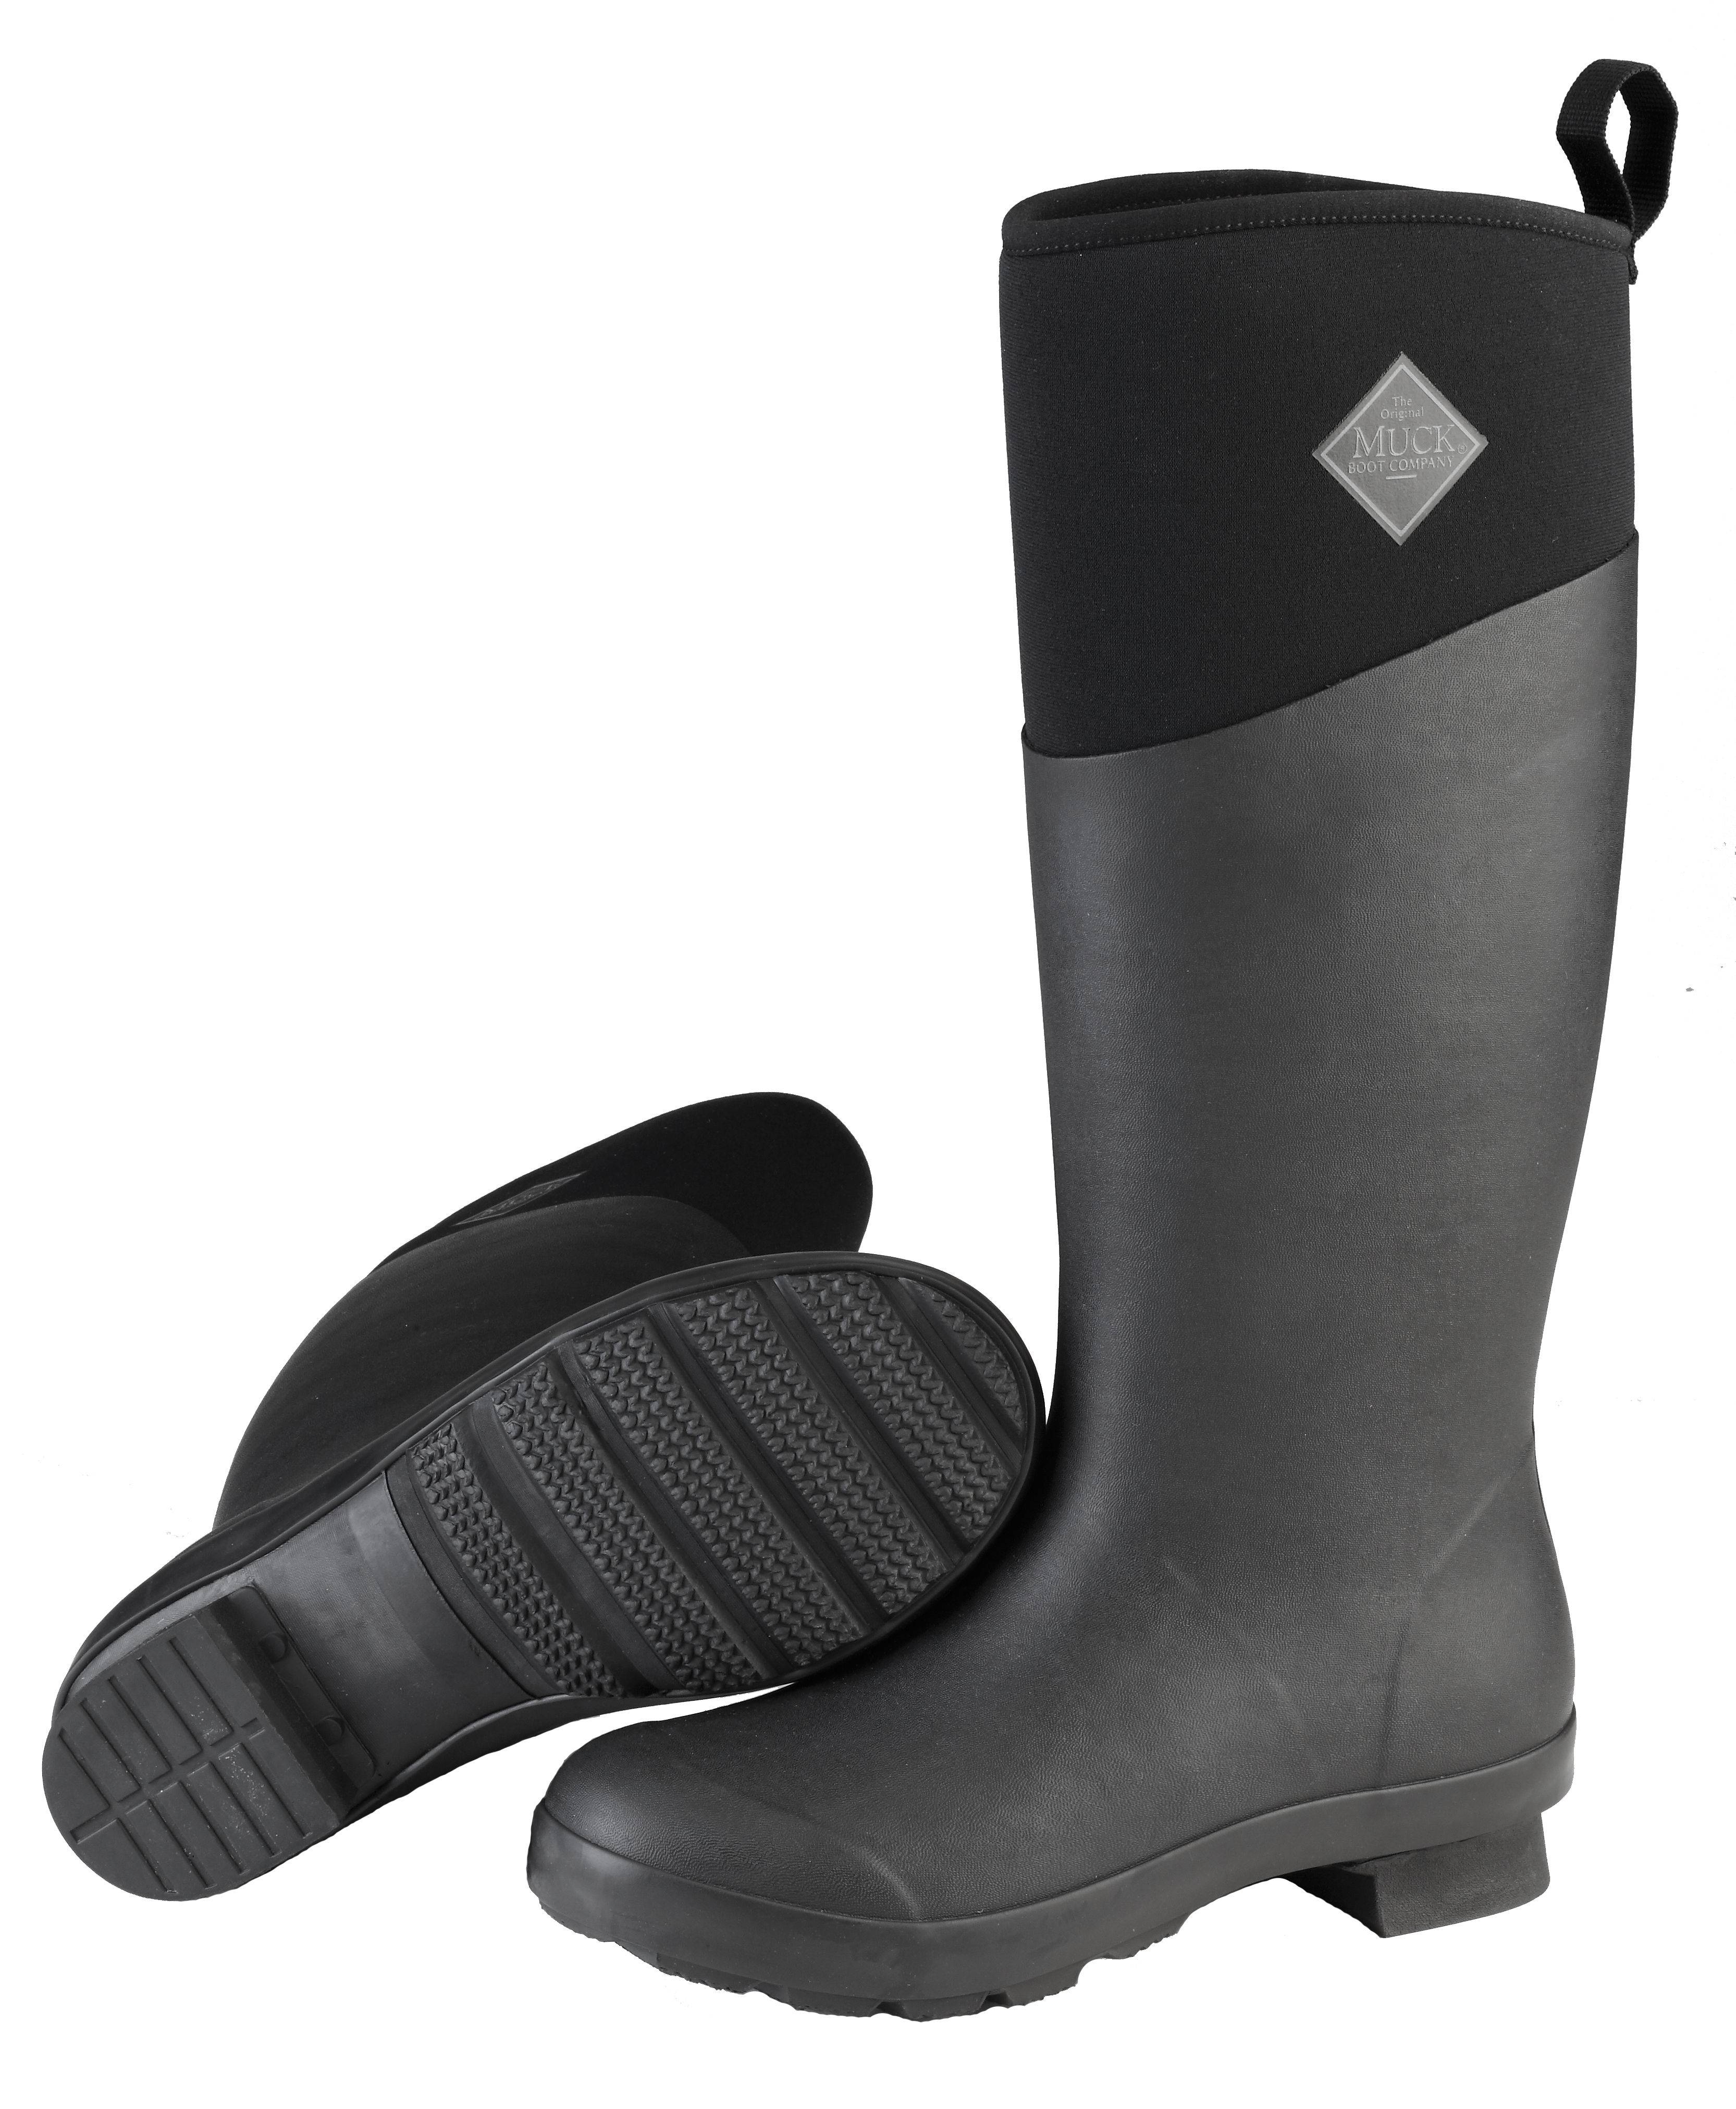 Muck Boots Tremont Tall Boot - Ladies - Black